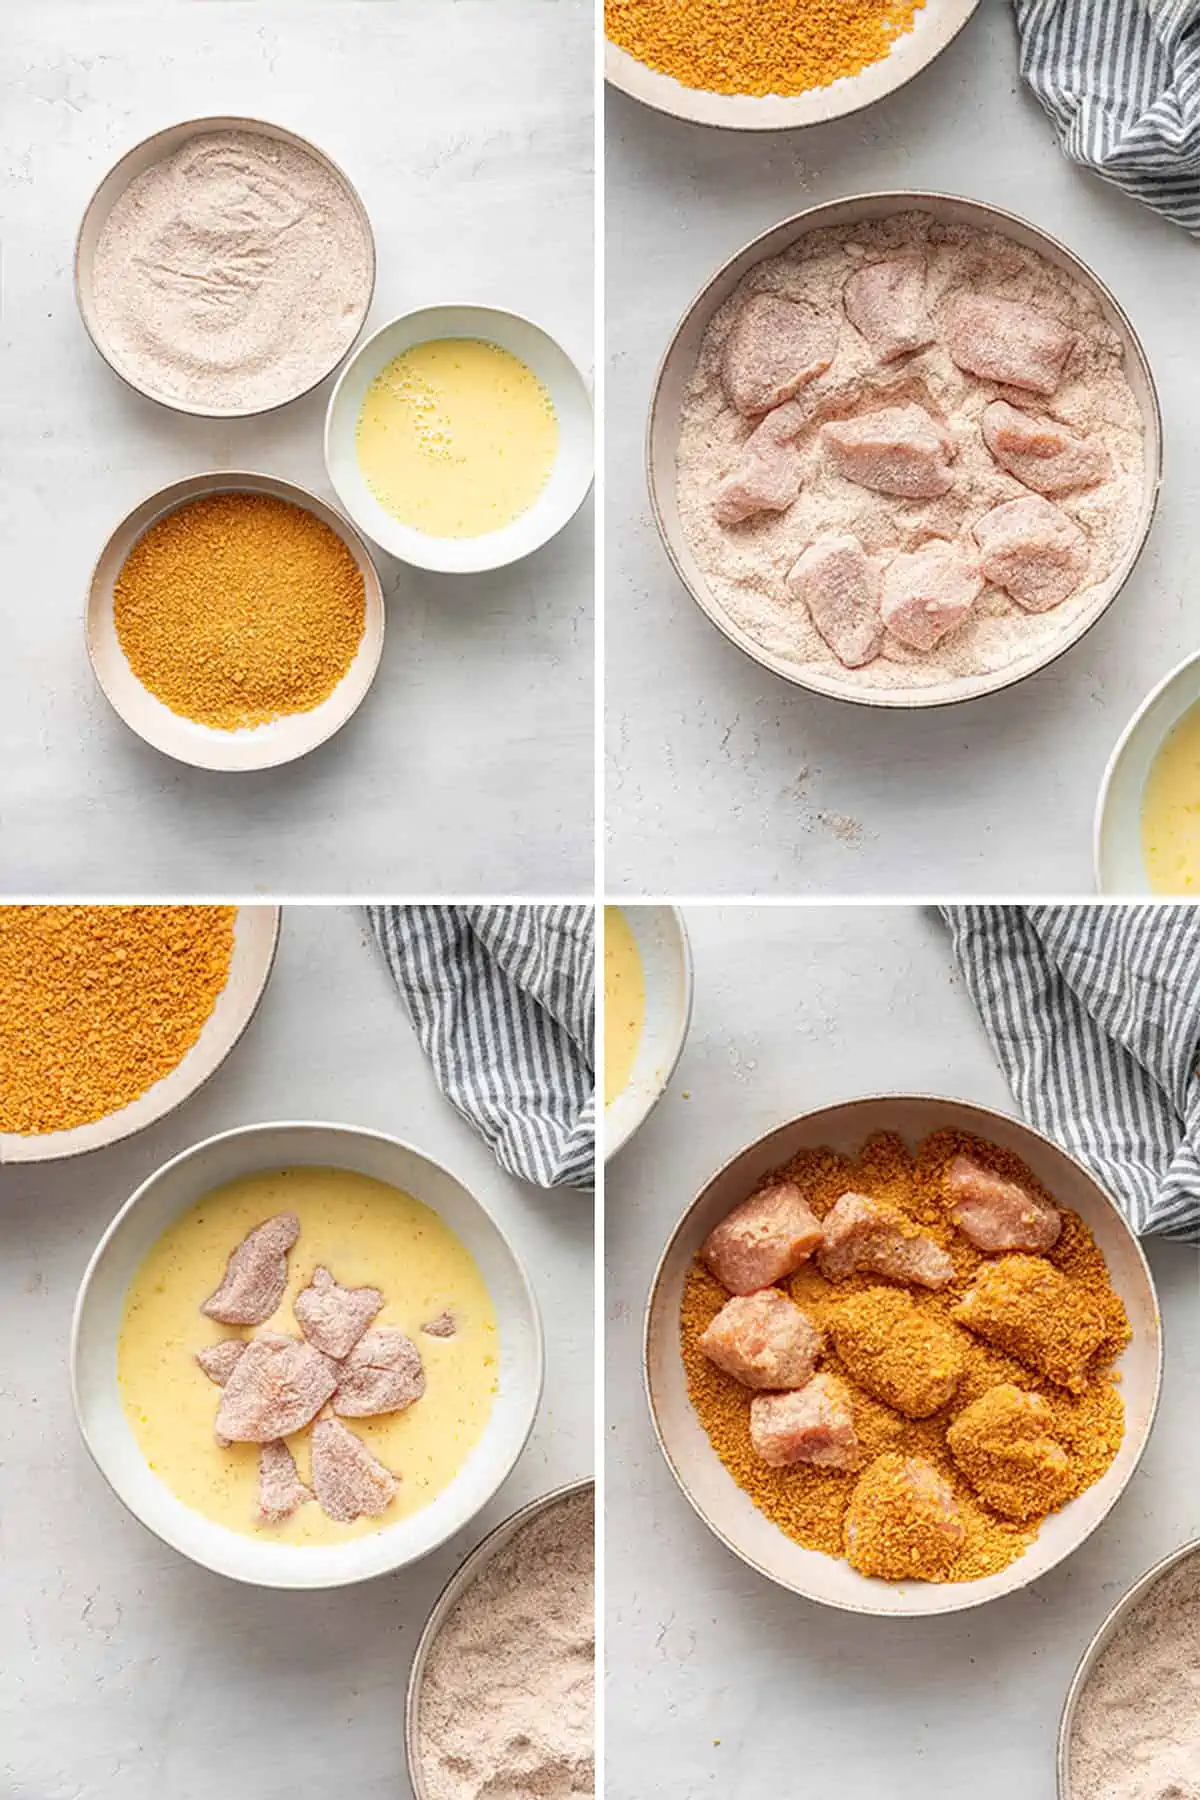 Four images: the first is a bowl of ground up cornflakes, next to a bowl of eggs beat with milk, next to a bowl with season flour; the second is a bowl of chicken breast chunks in the bowl of flour; the third is the chicken chunks, covered in flour, in the egg and mixture, and the fourth is the chicken chunks, covered in the egg mixture, in the bowl of ground cornflakes, covered in them